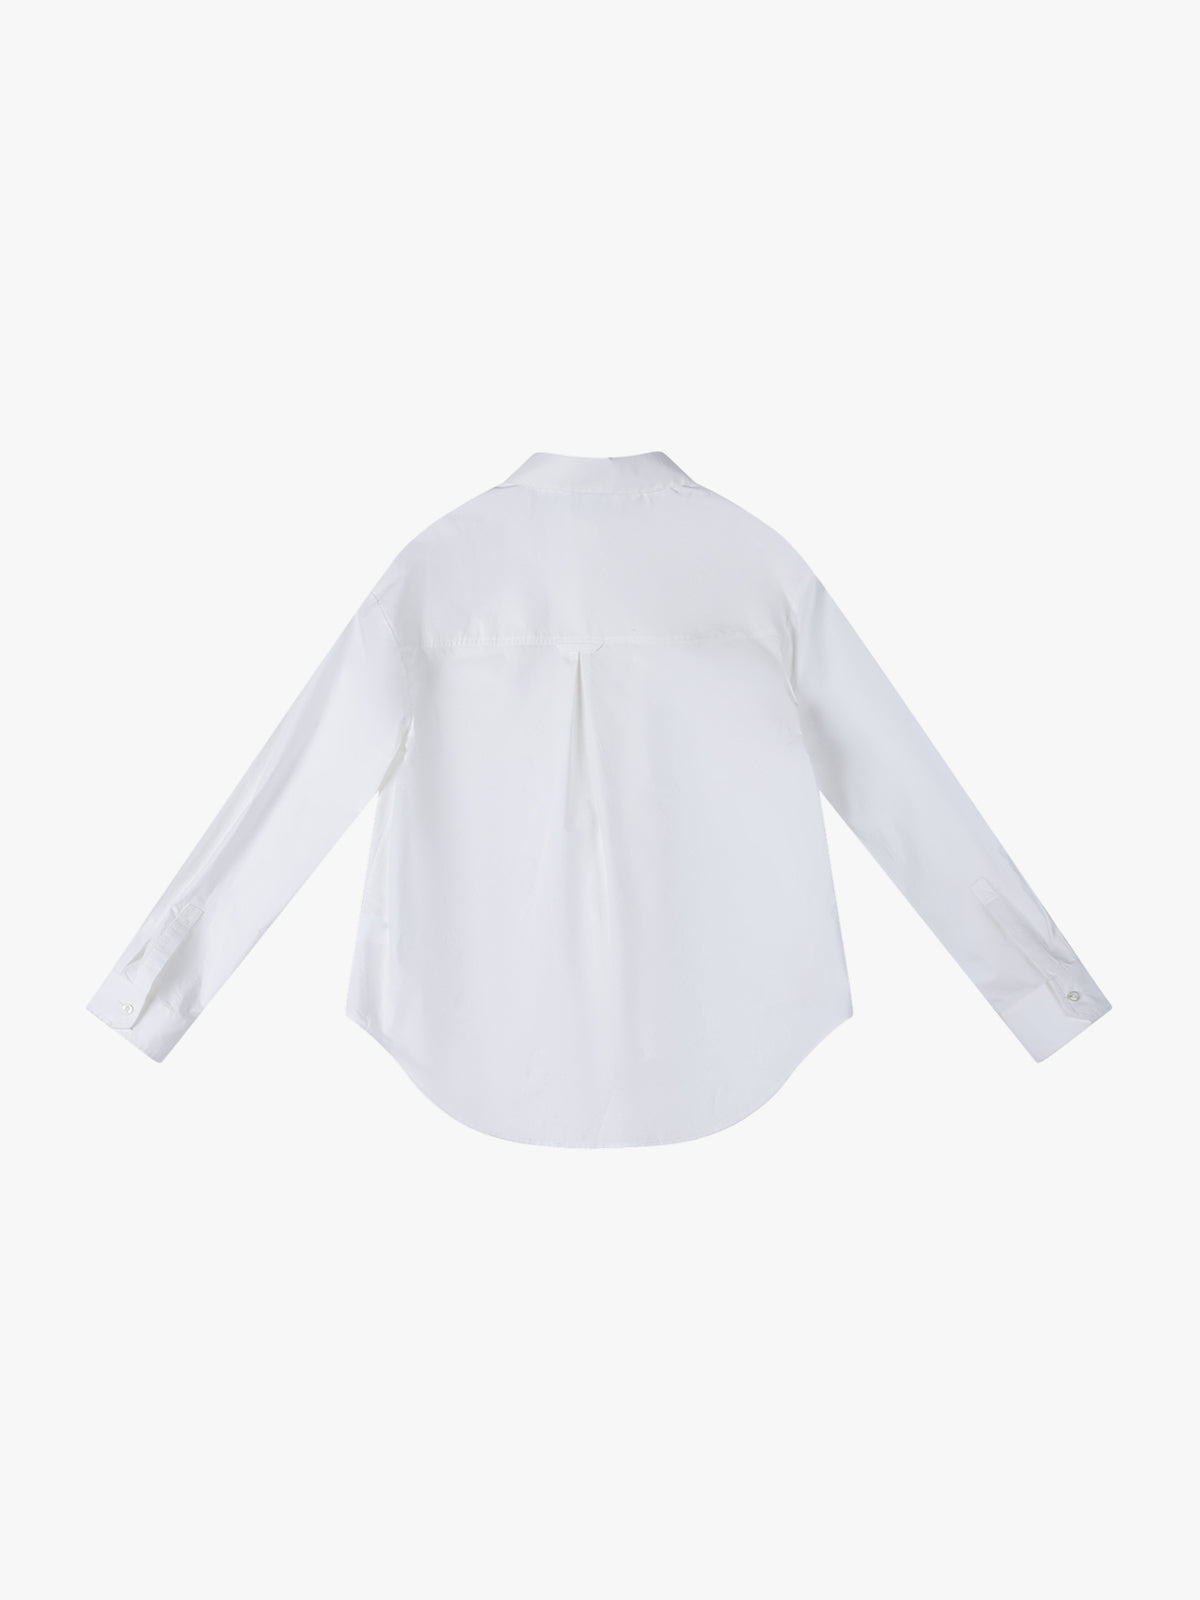 White 100% Cotton H-Shaped Silhouette Blouse